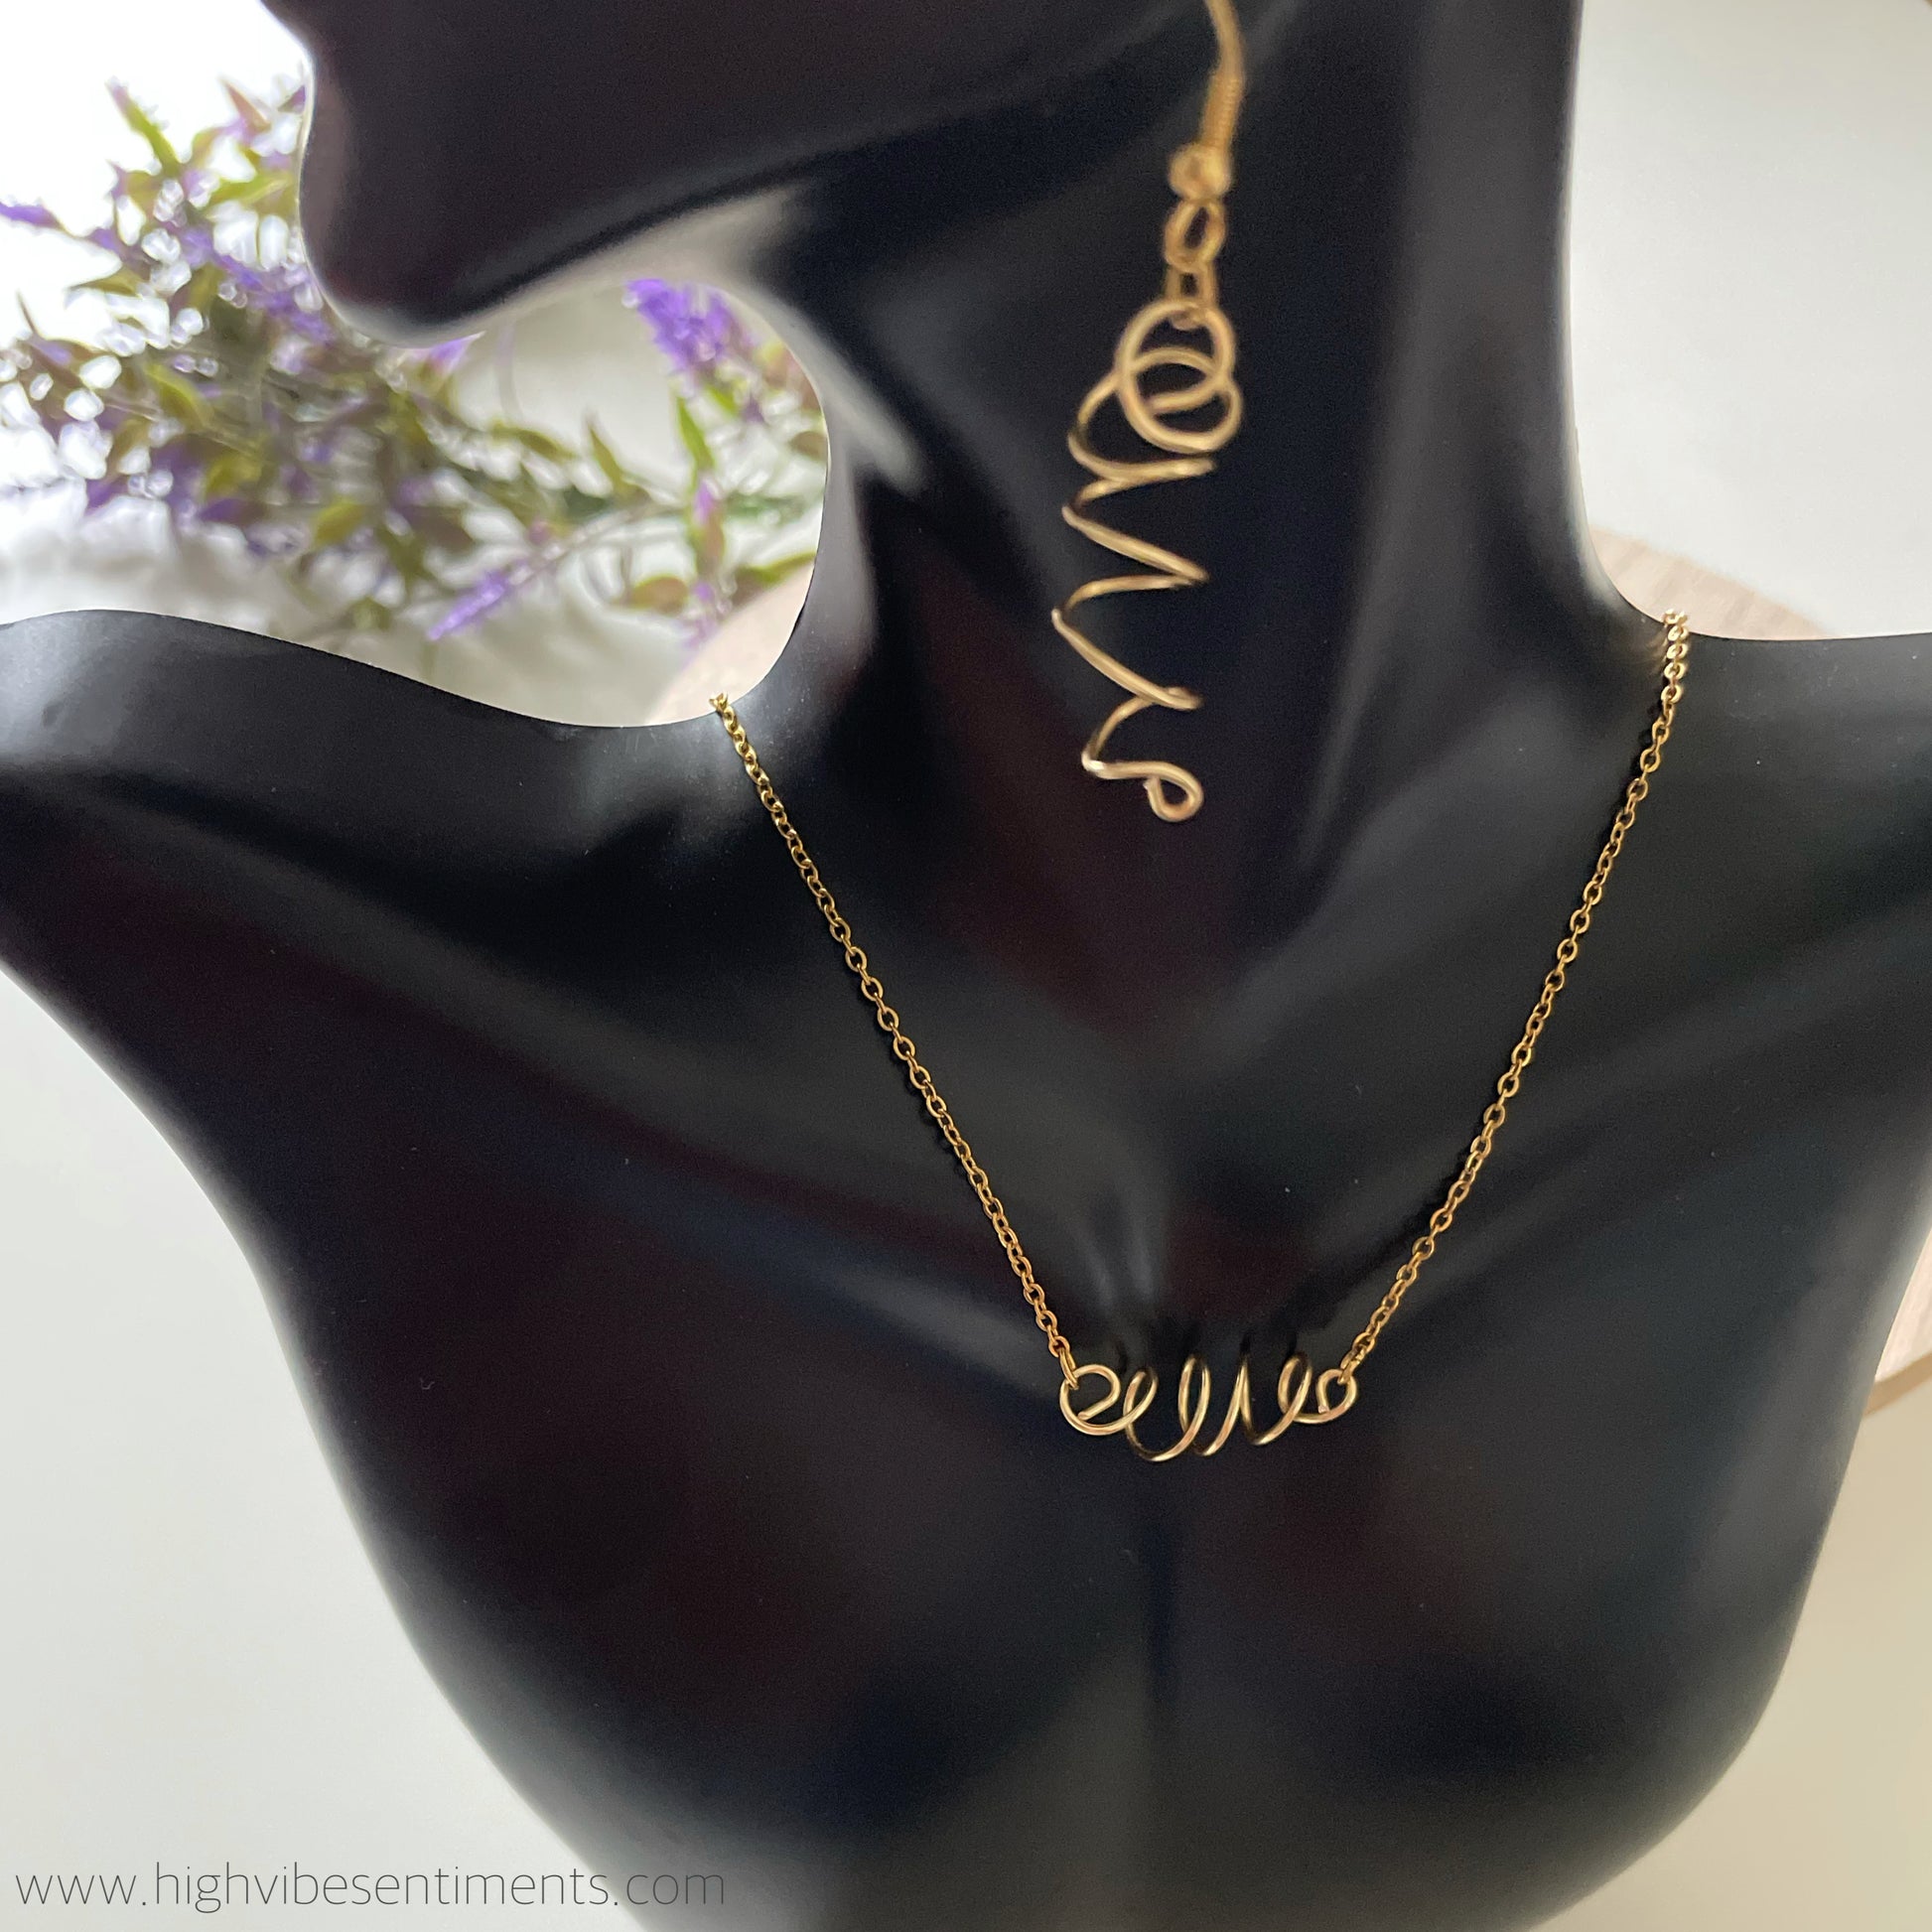 High Vibe Sentiments, Energy Necklace